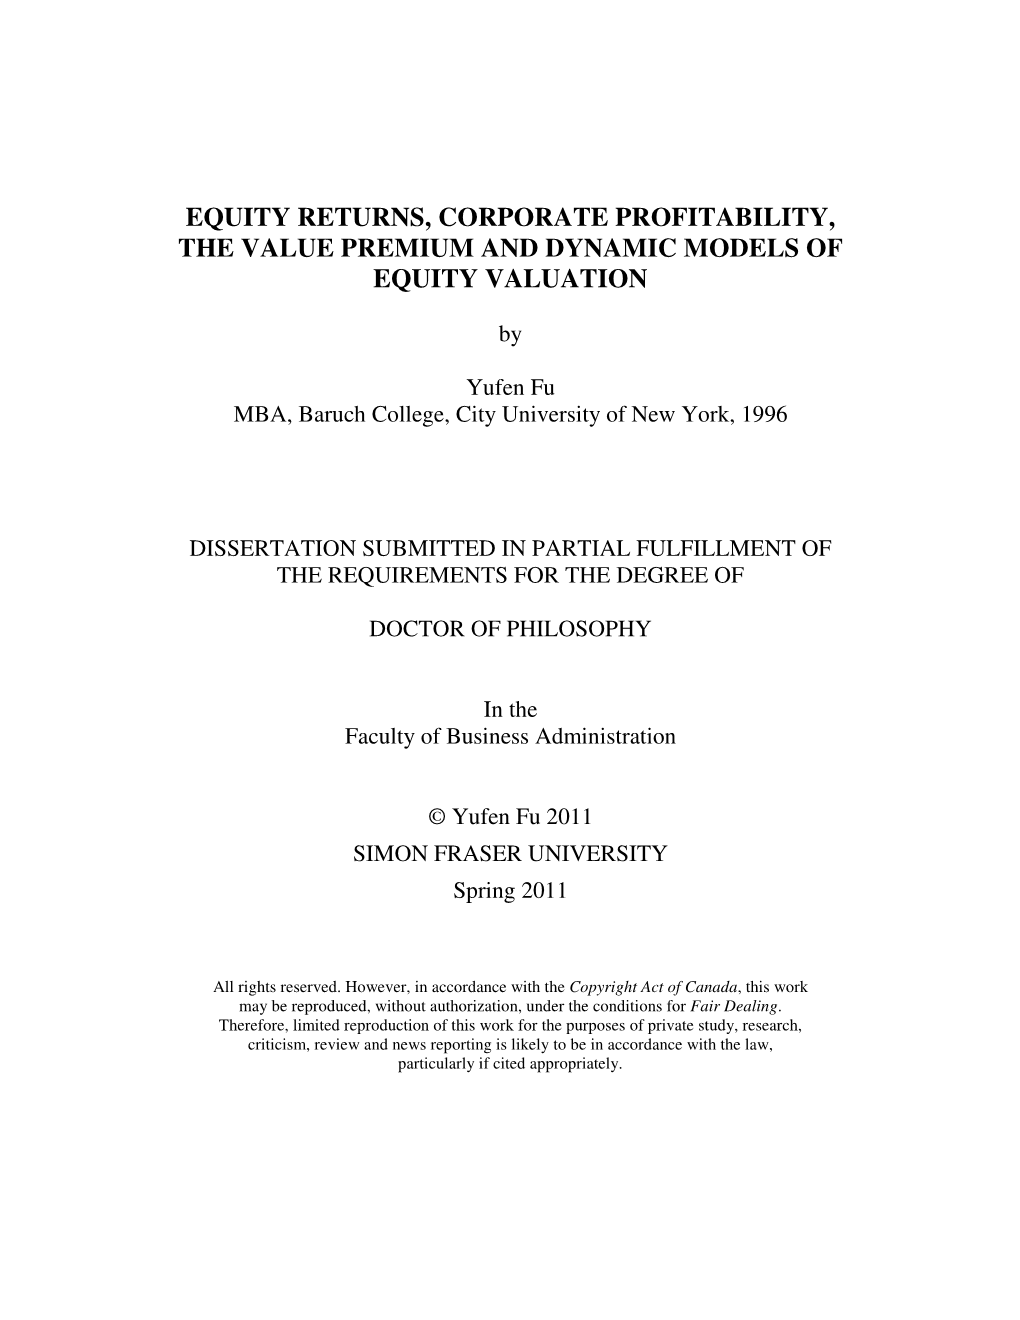 Equity Returns, Corporate Profitability, the Value Premium and Dynamic Models of Equity Valuation